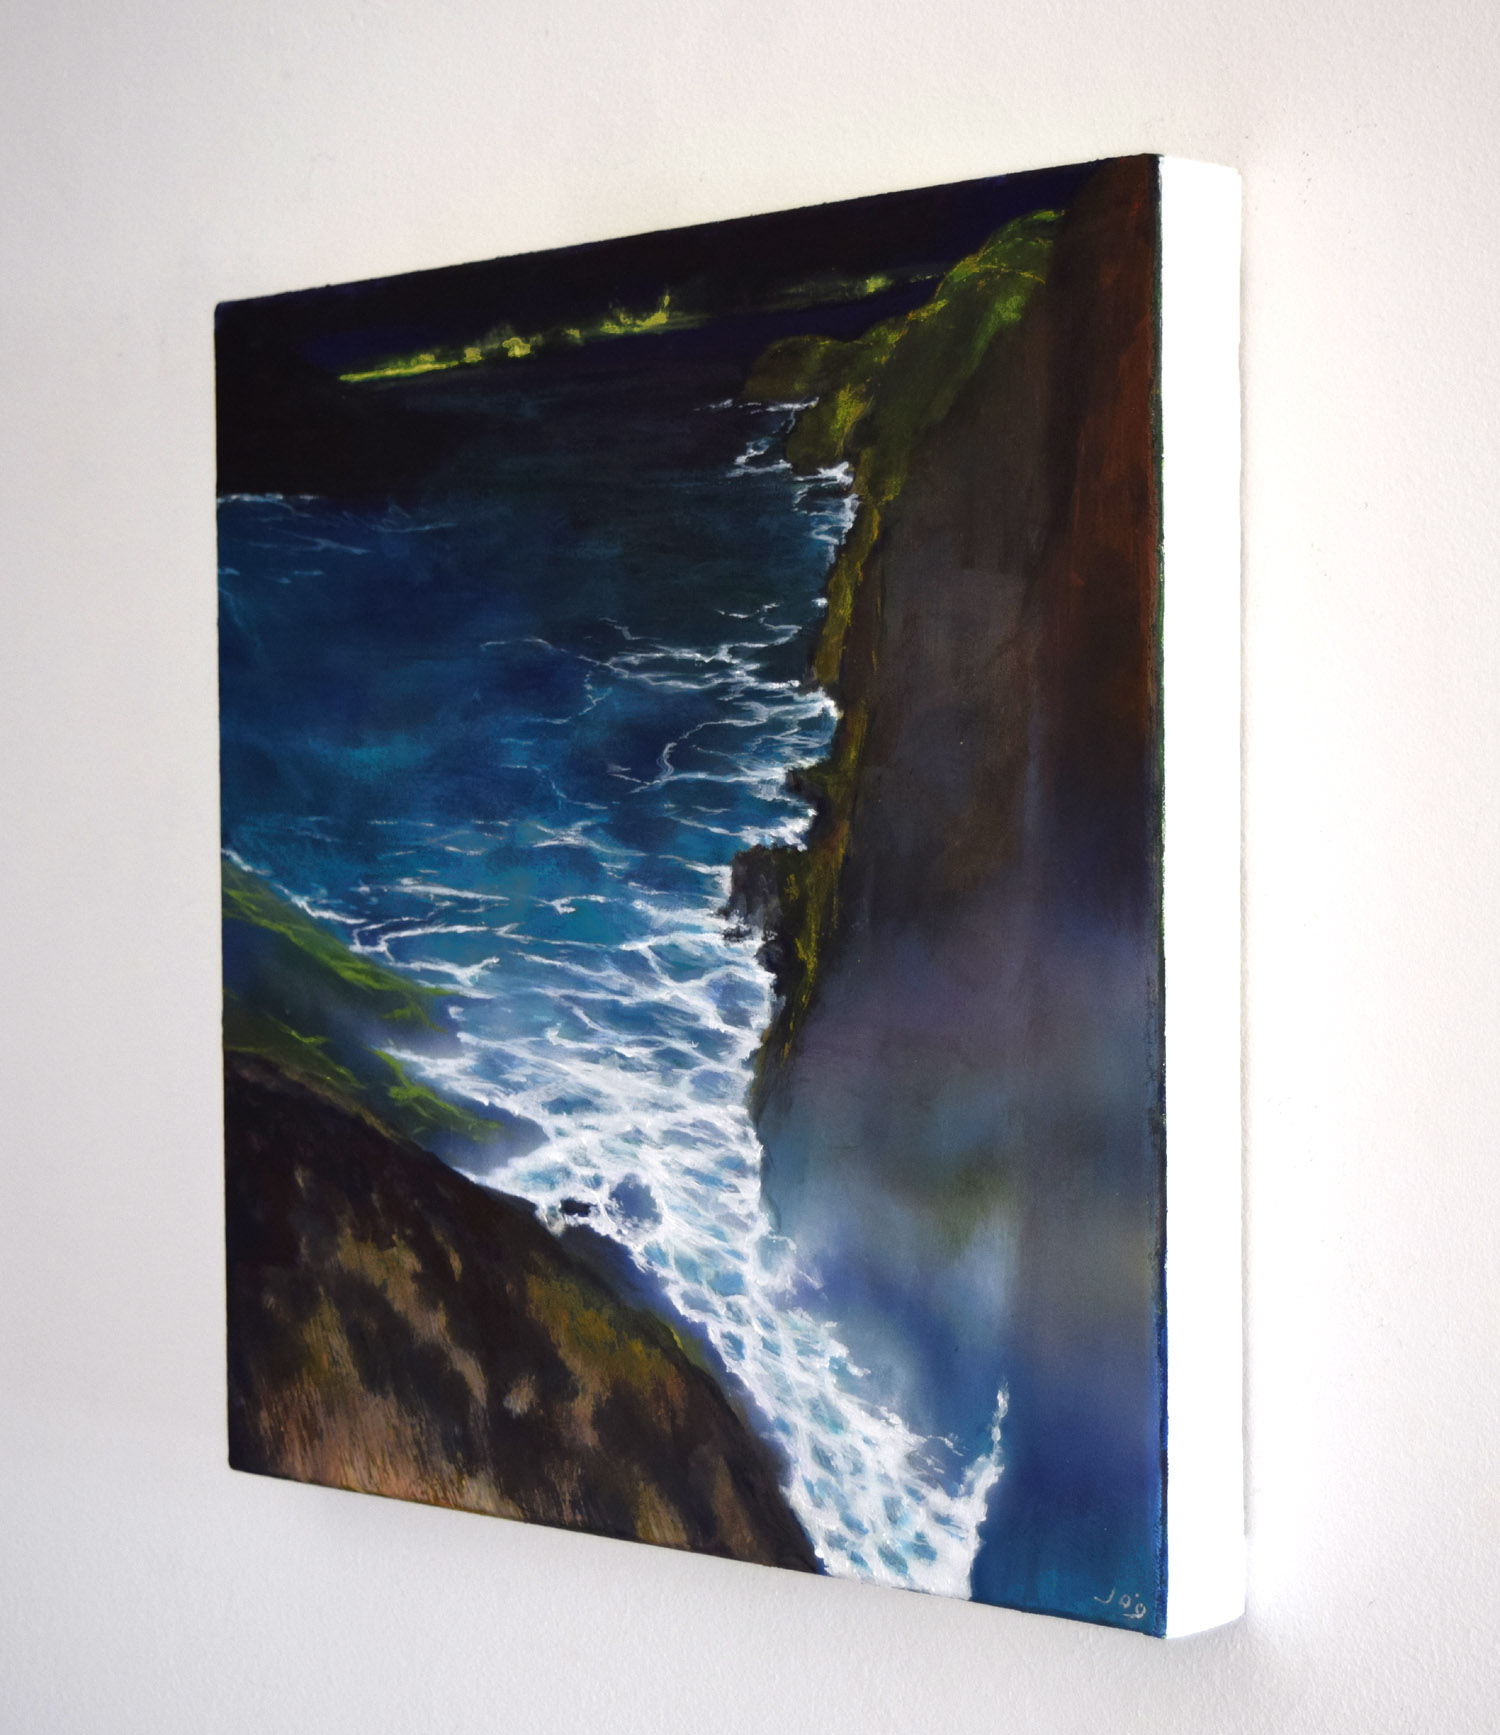 Sideview of 'The Edge of the Deep Green Sea III' painting by John O'Grady A seascape with waves crashing against a cliff face